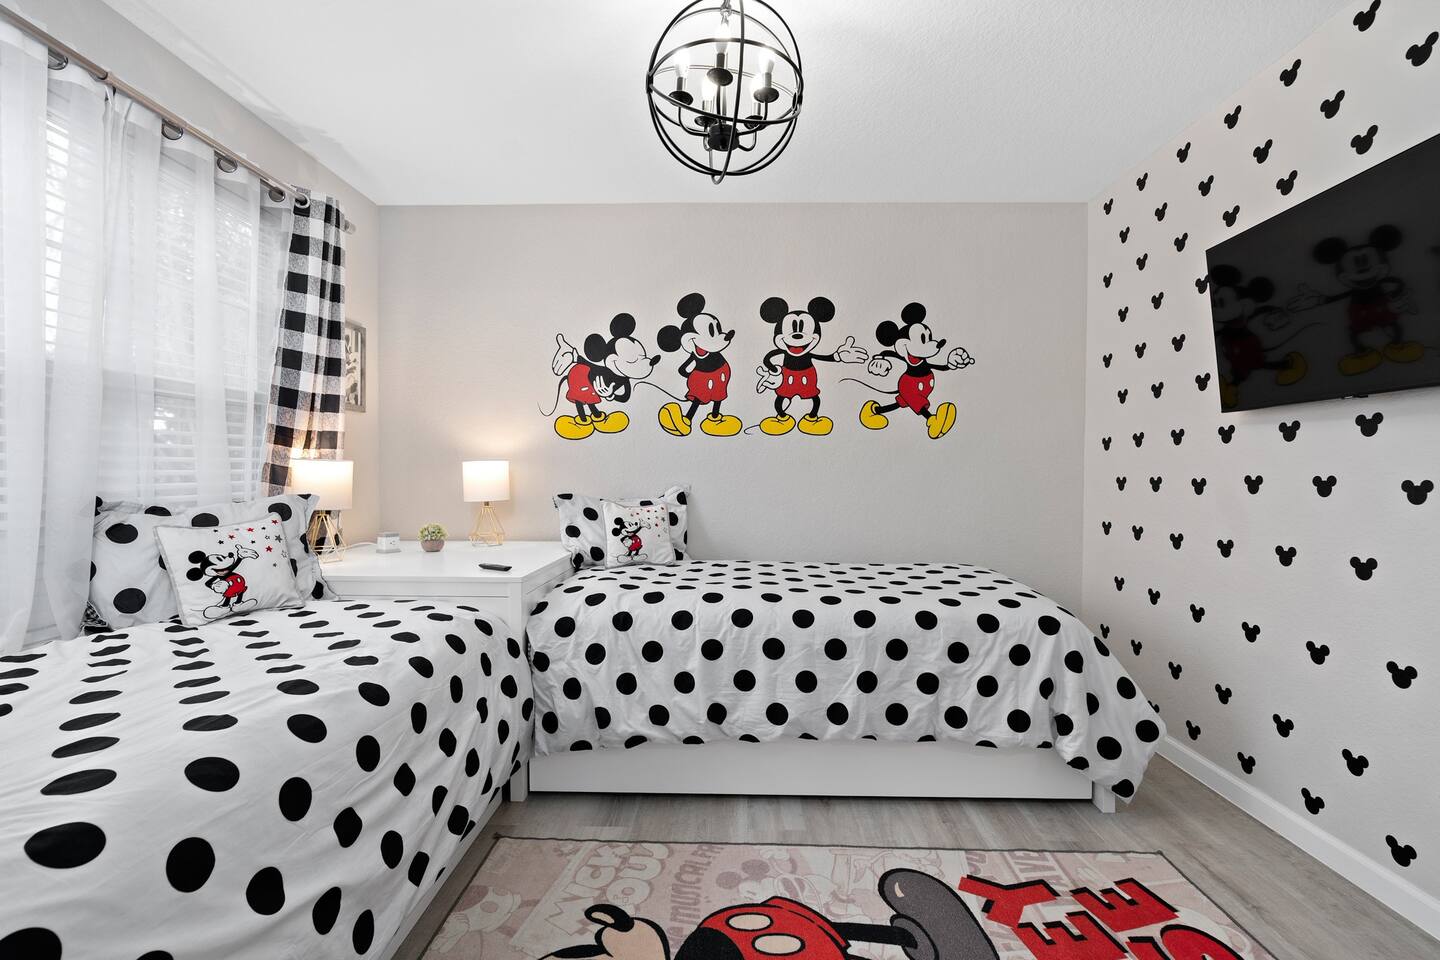 Mickey-mouse themed bedroom